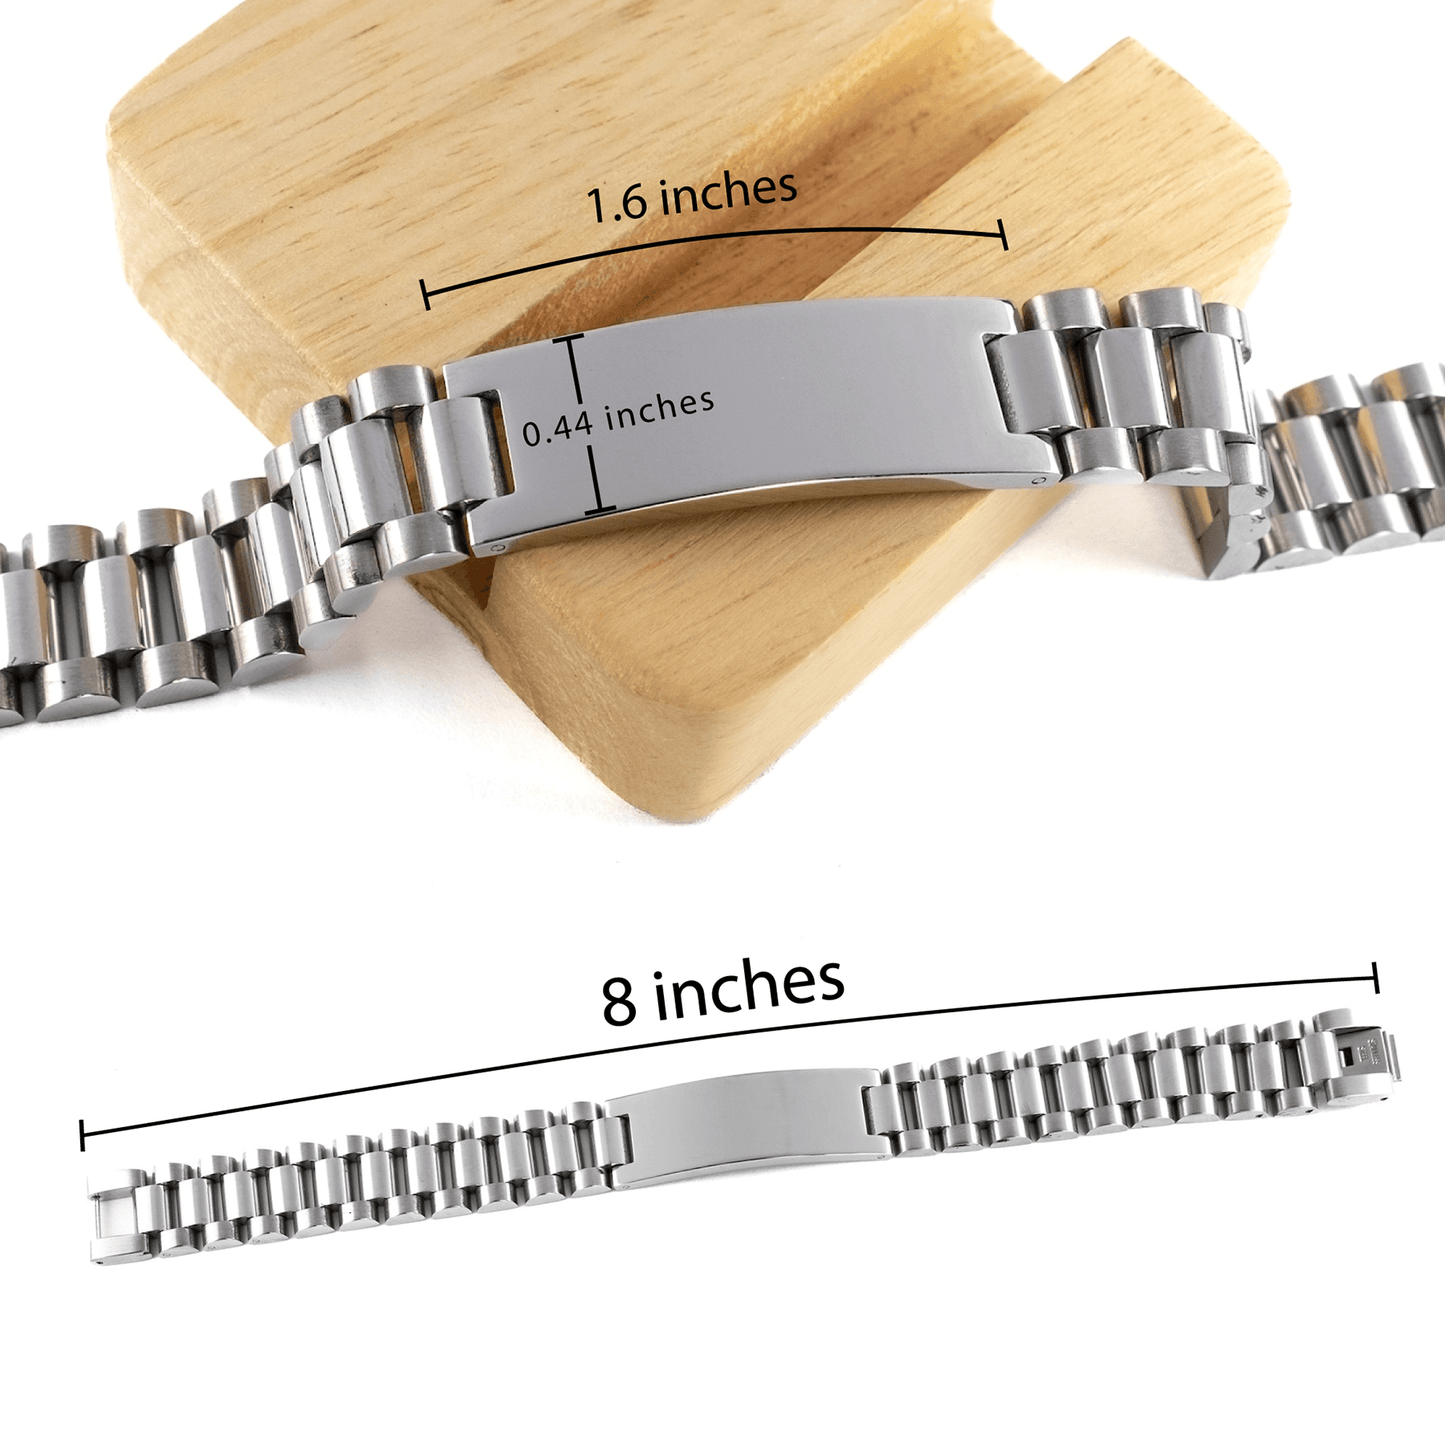 Insurance Sales Agent Ladder Stainless Steel Engraved Bracelet - Thanks for being who you are - Birthday Christmas Jewelry Gifts Coworkers Colleague Boss - Mallard Moon Gift Shop